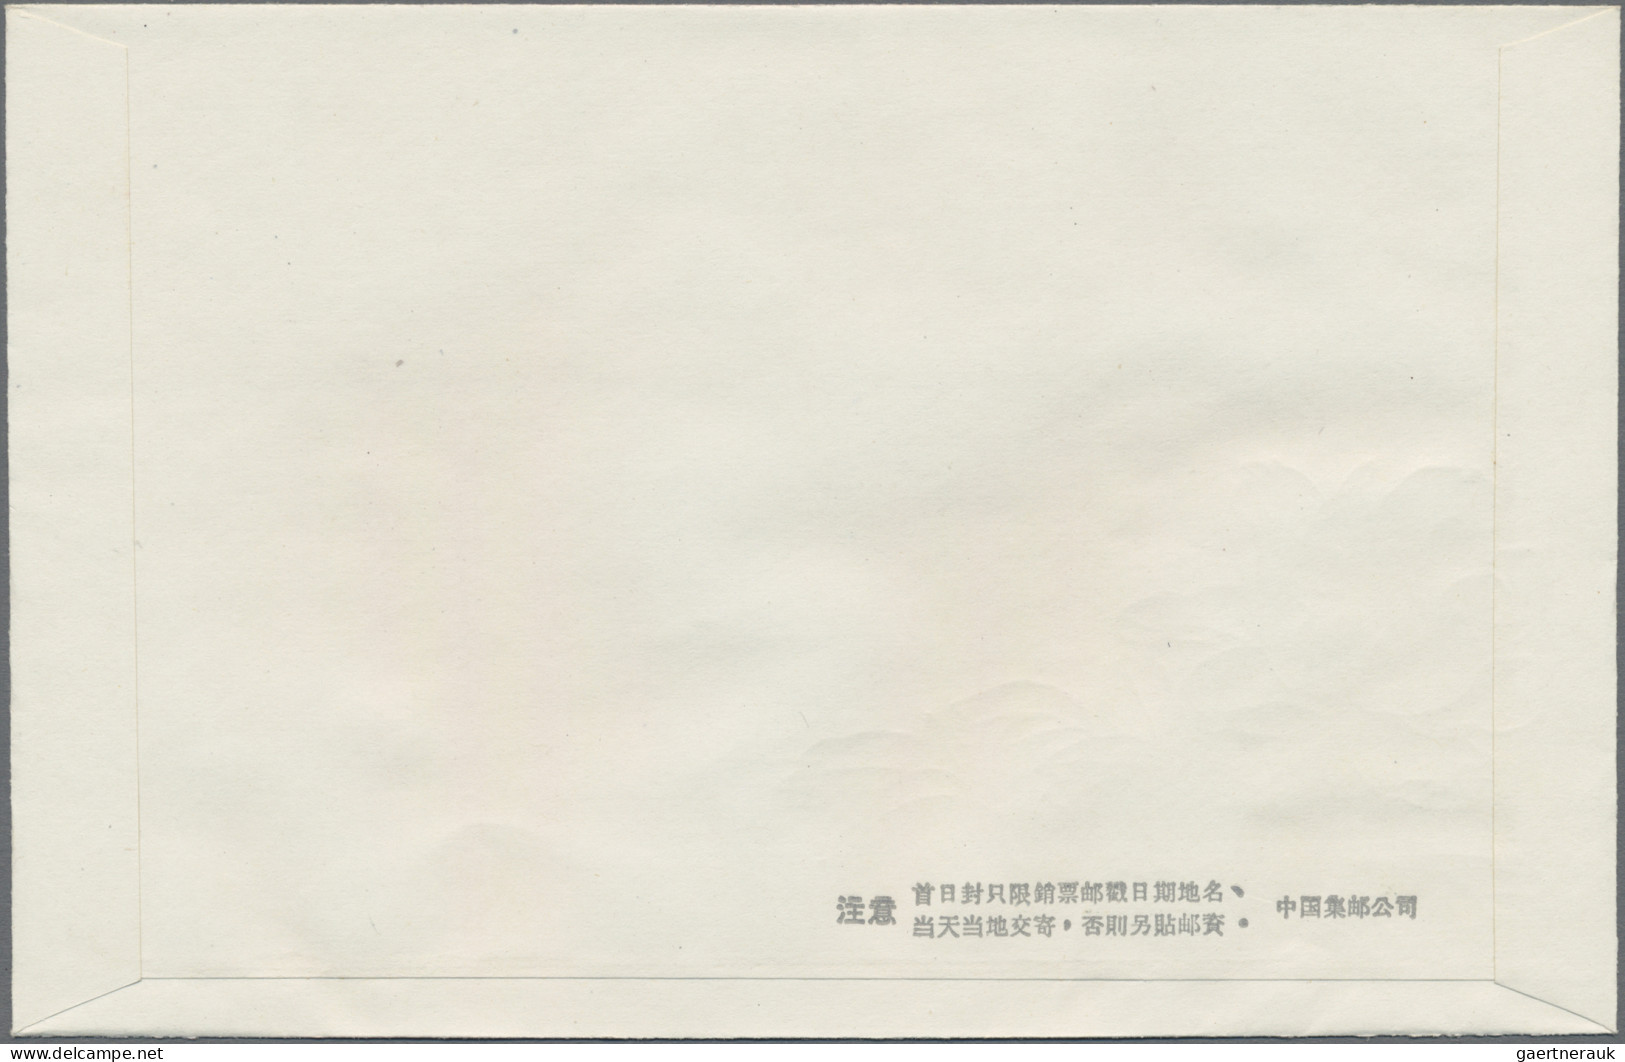 China (PRC): 1964, Peonies Set (S61) On Three Unaddressed Cacheted Official FDC, - Briefe U. Dokumente